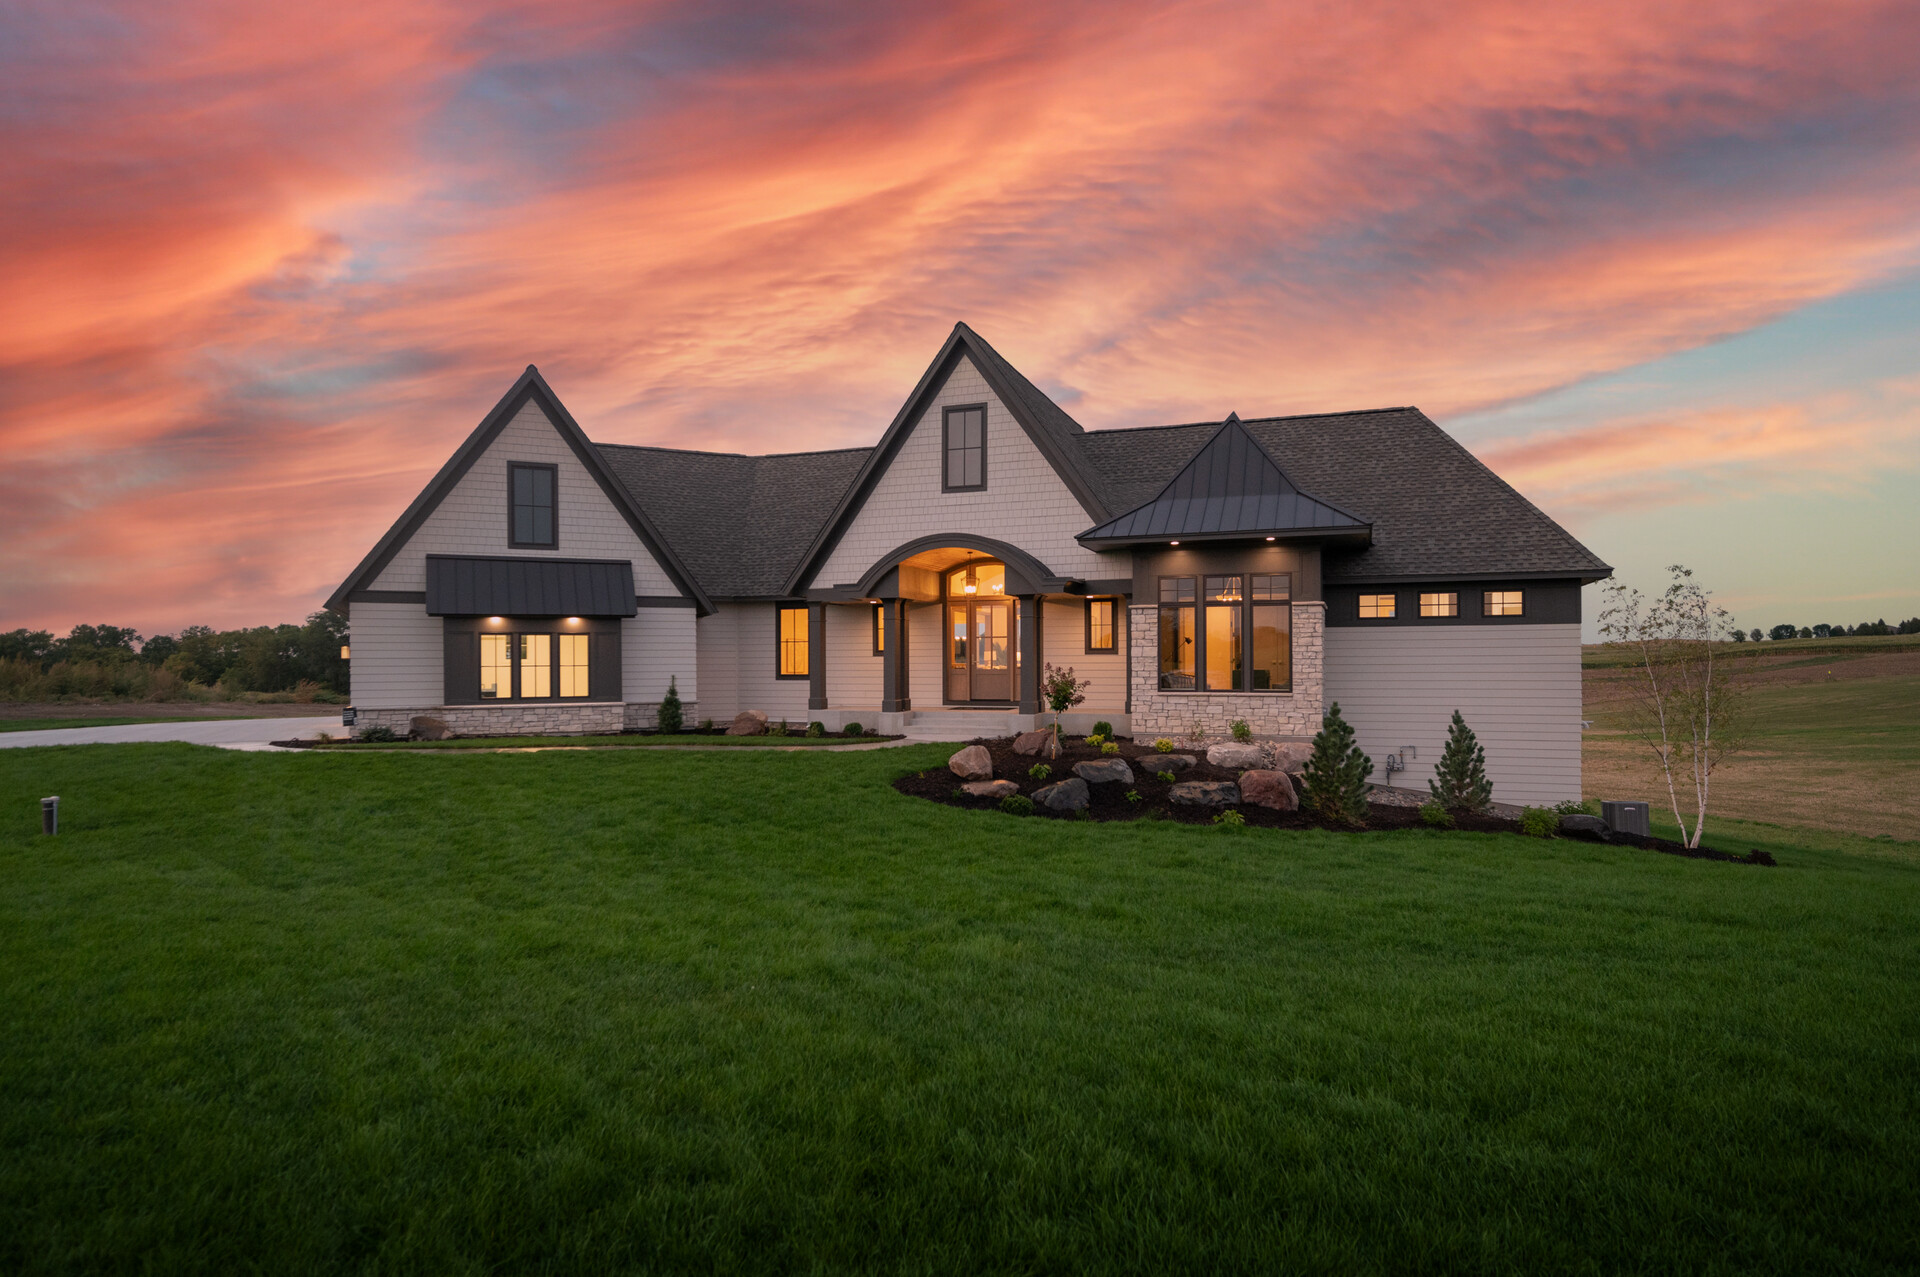 A beautiful custom home with a sunset sky behind it.